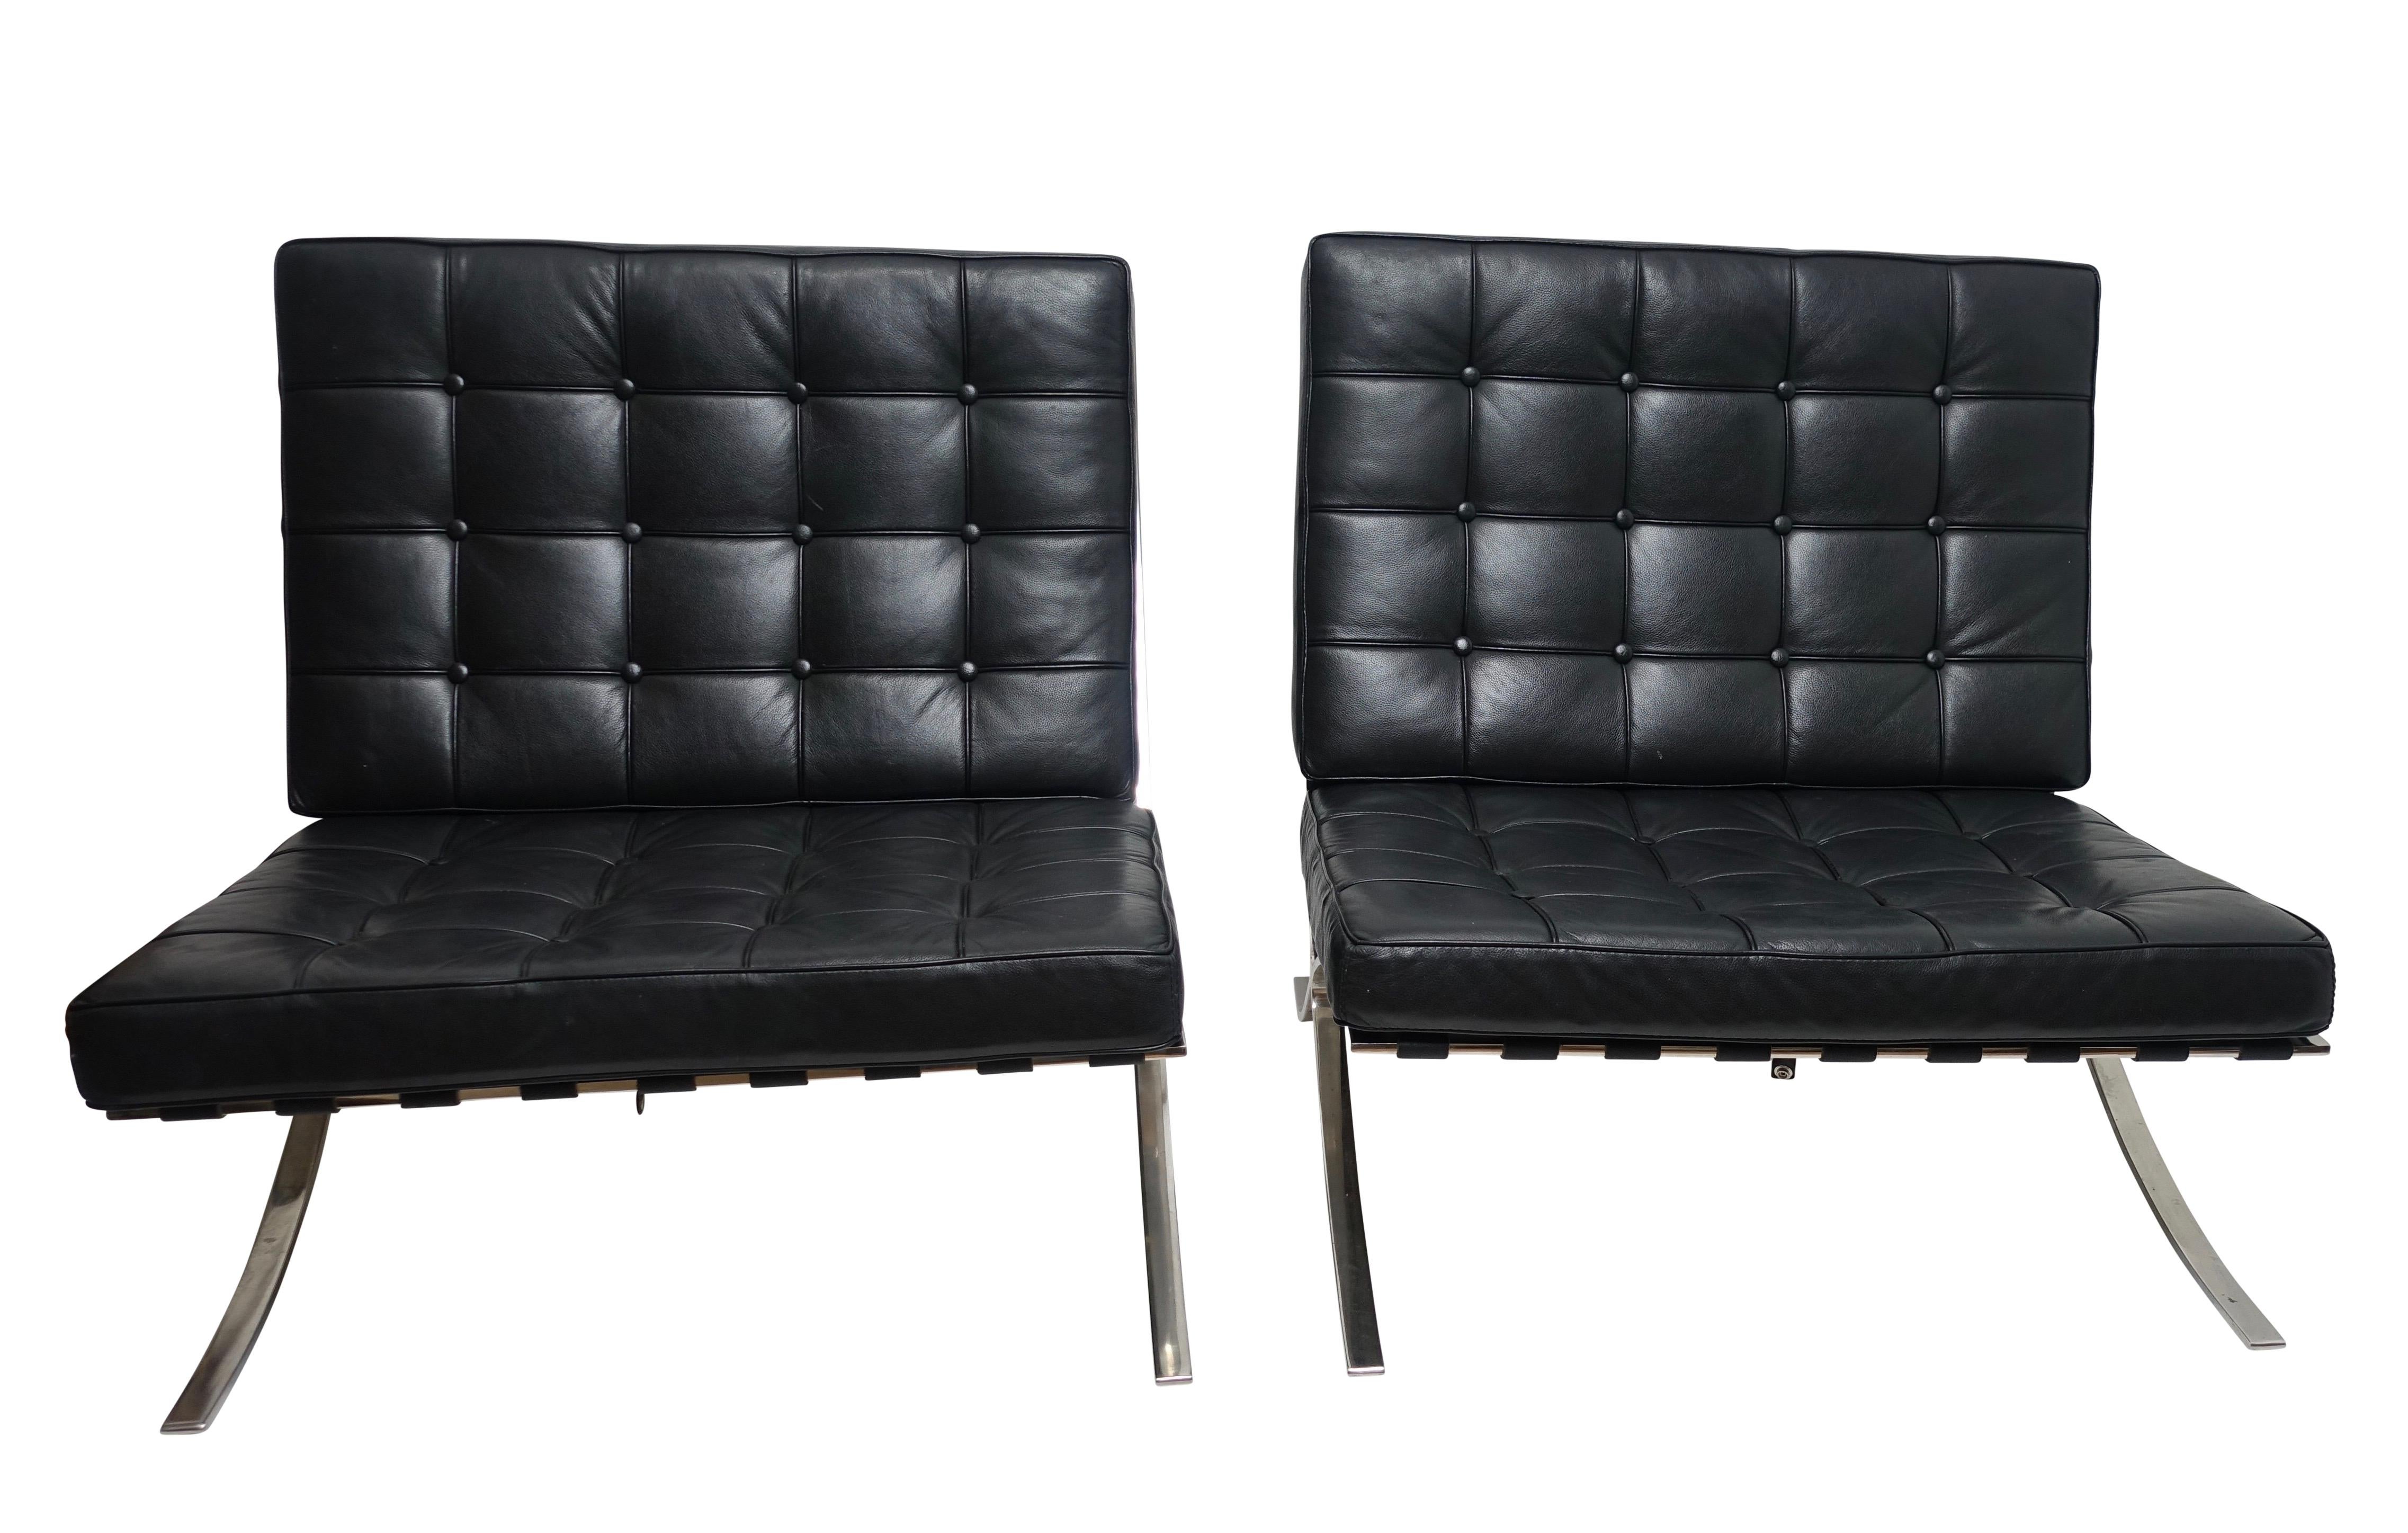 American Pair of Knoll Barcelona Style Black Leather Chairs, Mies van der Rohe